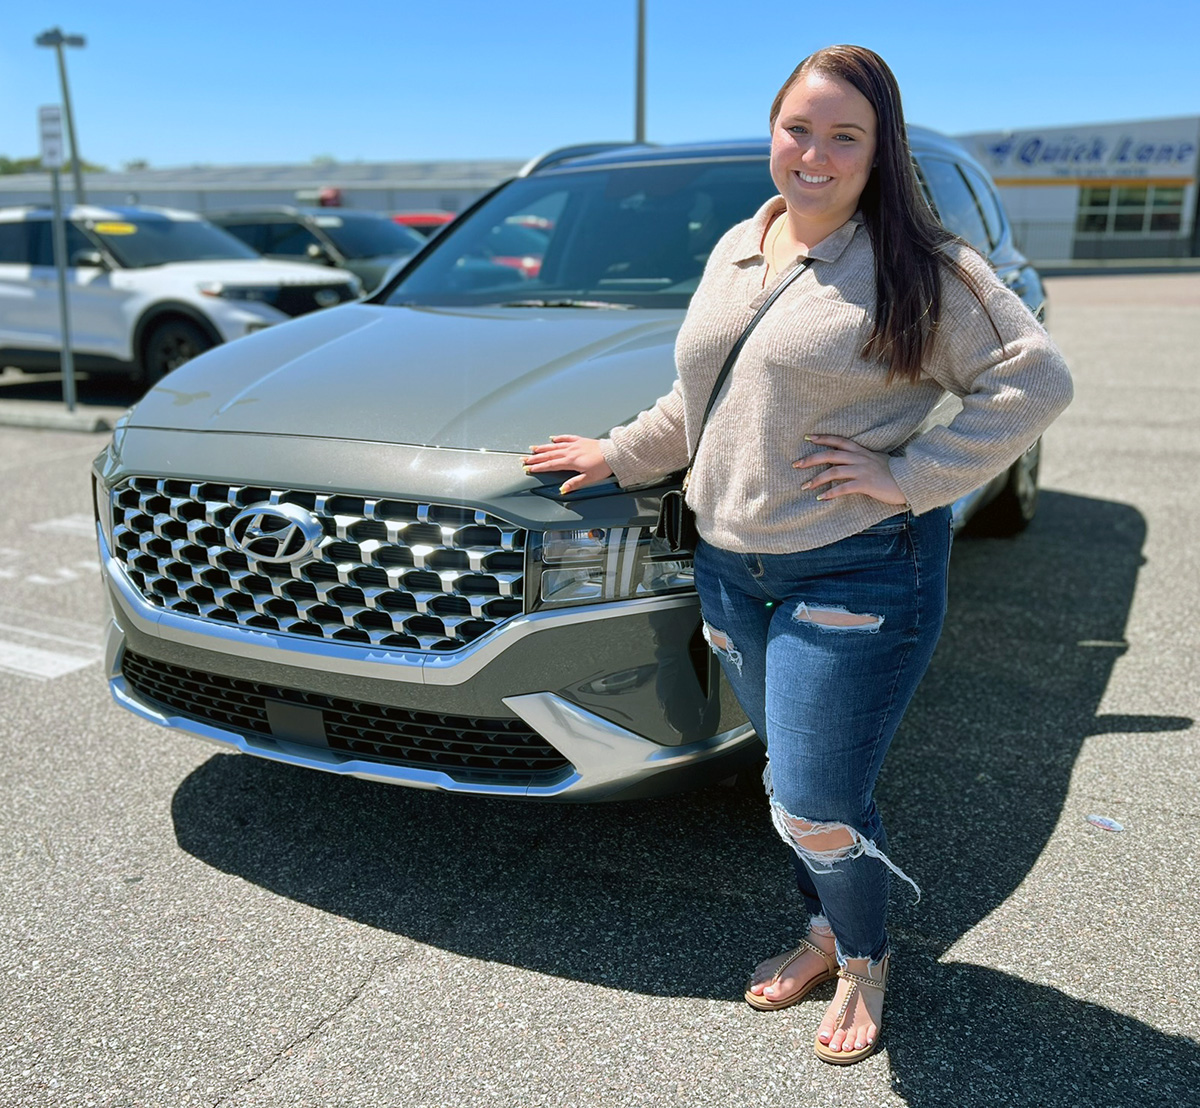 Always just what you're looking for with a #GreatSelection, #GreatDeals & #GreatService like Danelle Harbin got when she came to #LakelandAutomall looking for a #NewSUV & salesperson #AngeloMickens helped find the #HyundaiSantaFe - #VeryNice Danelle & #Enjoy - we're here for you!